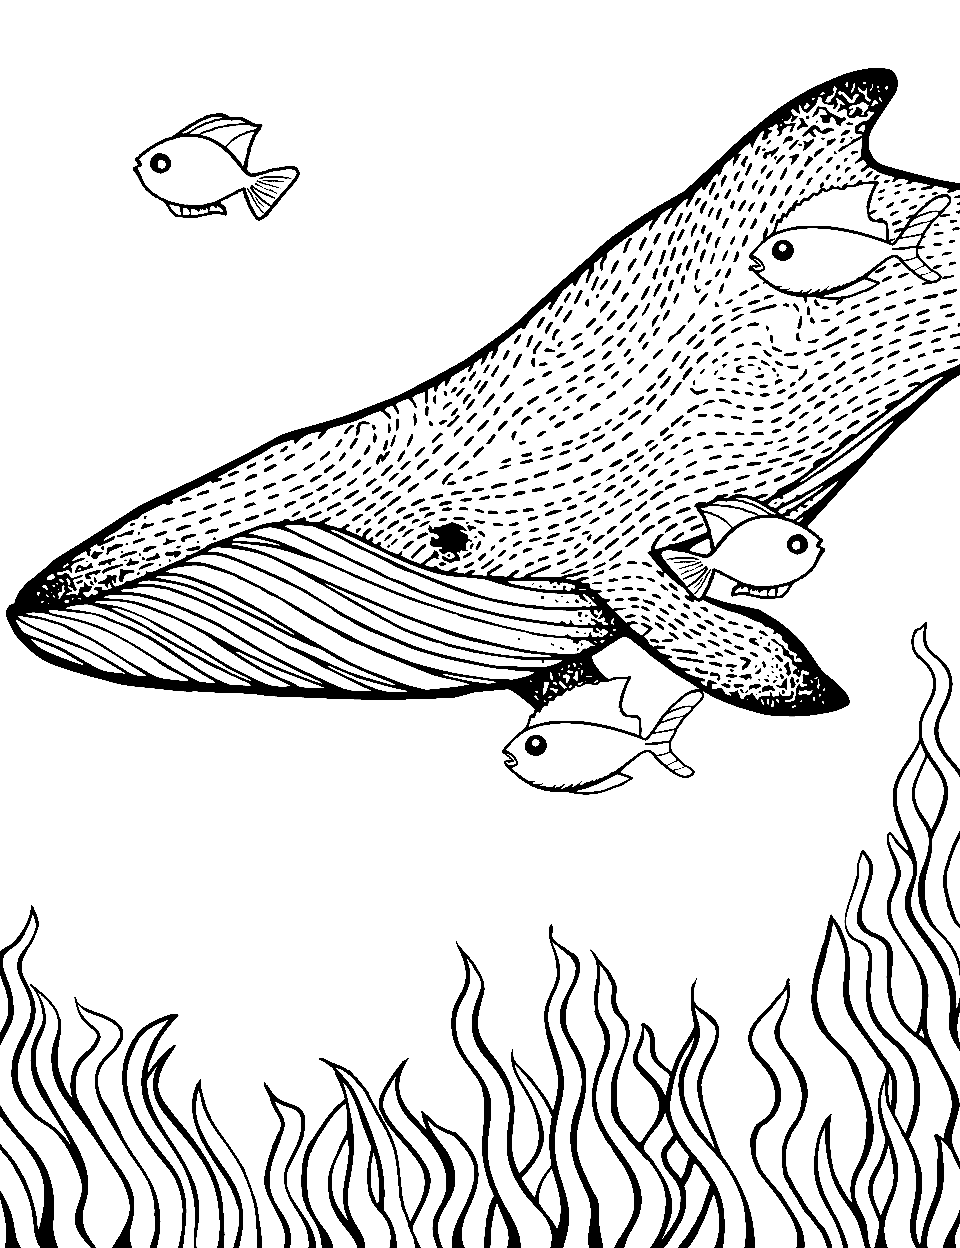 Realistic Whale Swimming Ocean Coloring Page - A large, detailed whale gently swimming in the ocean, with a few small fish nearby.